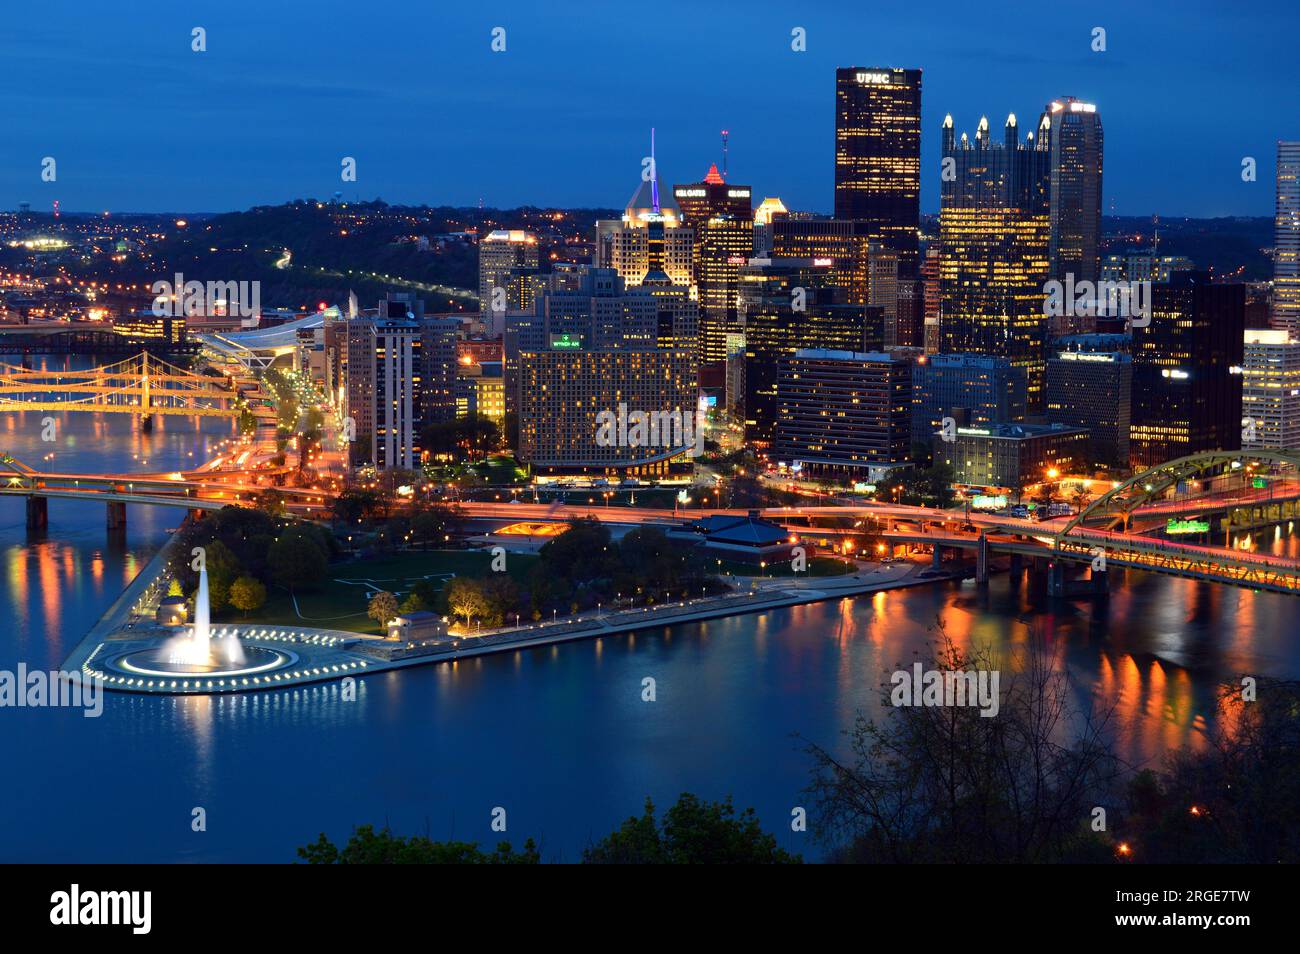 The lights of the Pittsburgh skyline are reflected in the surrounding waters of the Ohio, Allegheny and Monongahela Rivers at night Stock Photo